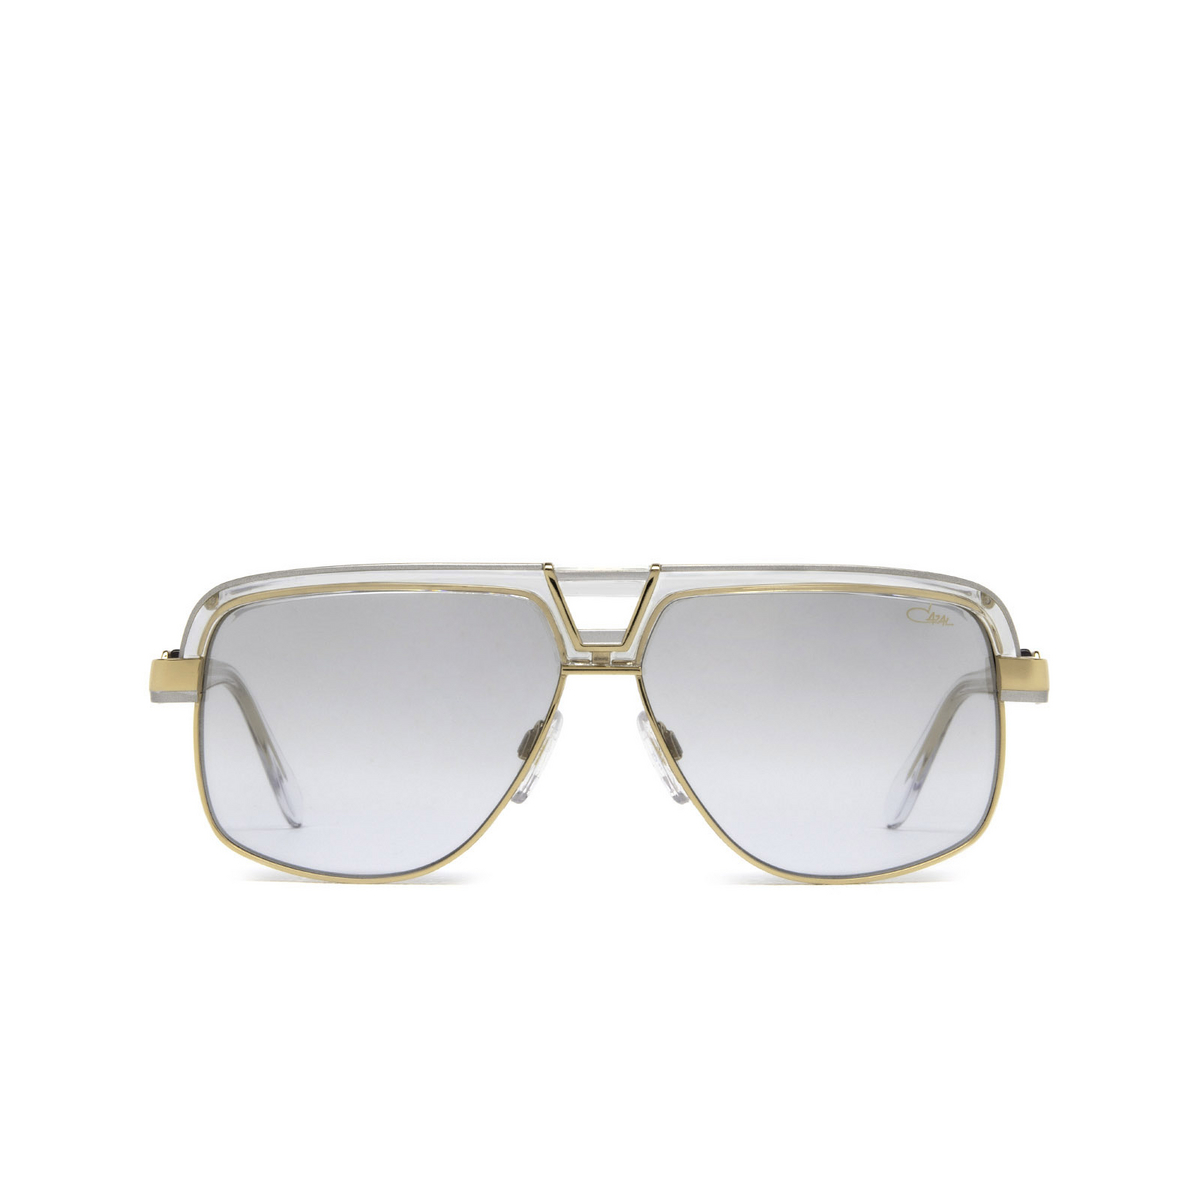 Cazal 991 Sunglasses 003 Crystal - Bicolour - front view